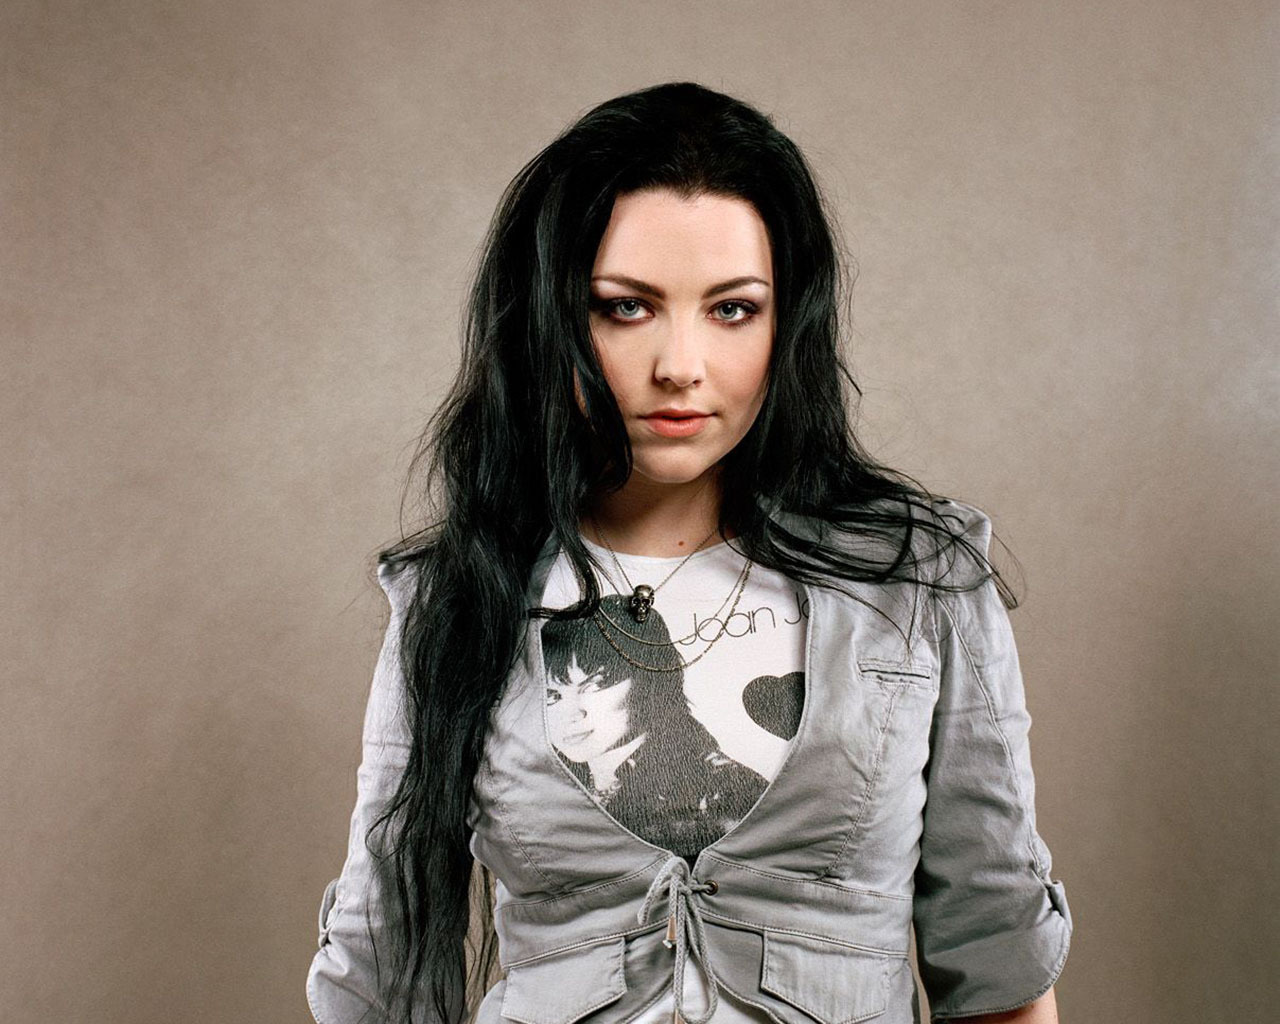 Evanescence Image Amy Lee HD Wallpaper And Background Photos